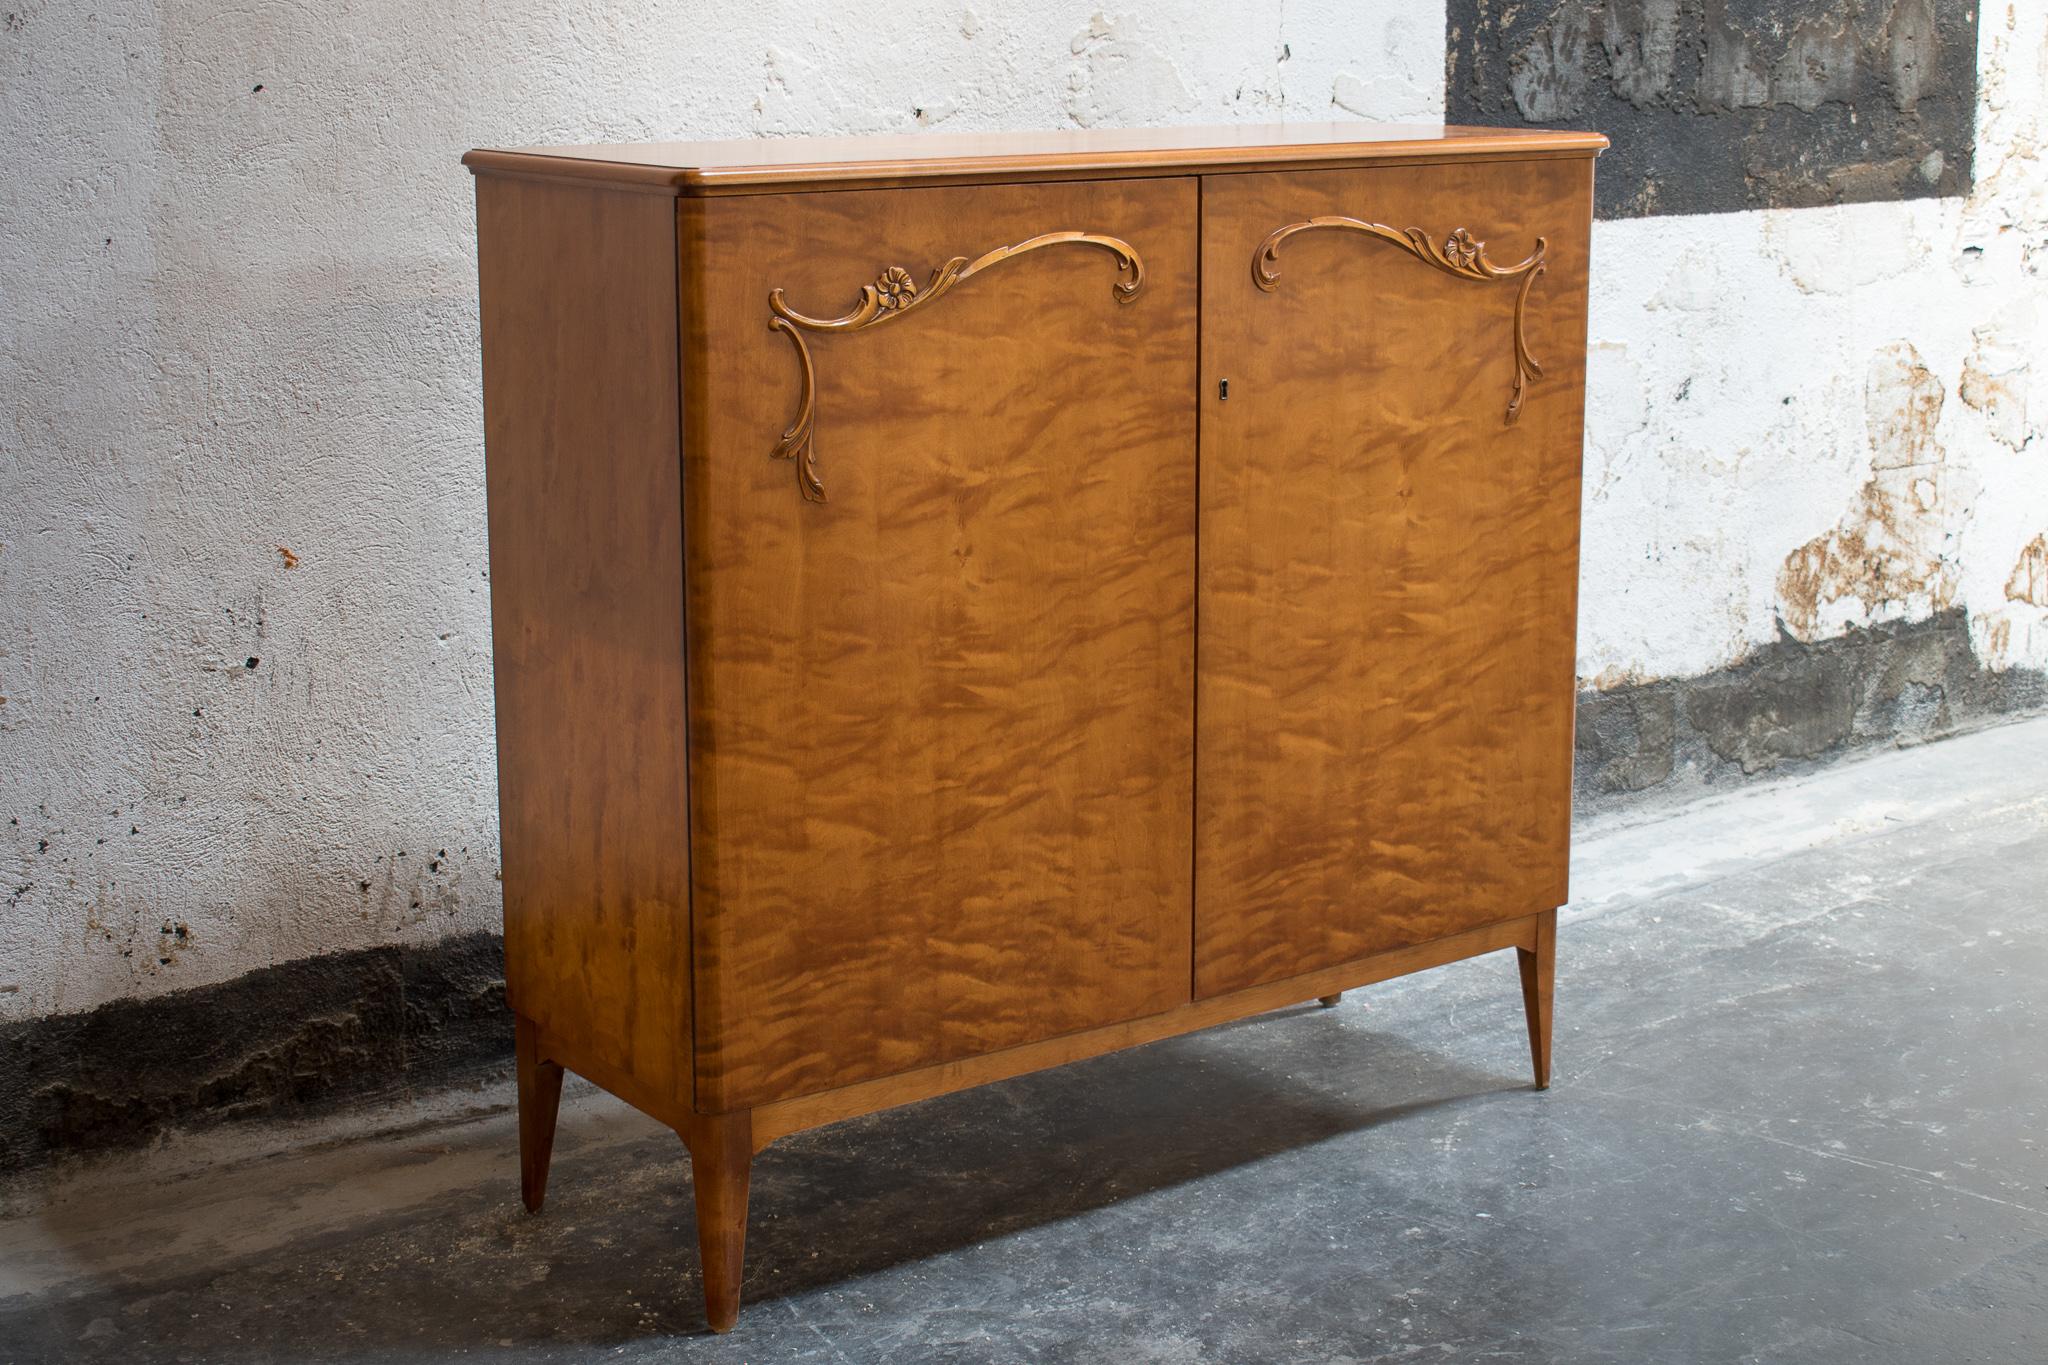 Art Moderne Credenza cabinet made of Golden Flame Birch in Sweden, circa 1940. Two-door storage cabinet has beautiful relief carved floral details on the doors. The wood has what is known as a flame grain pattern that has mellowed to a rich amber